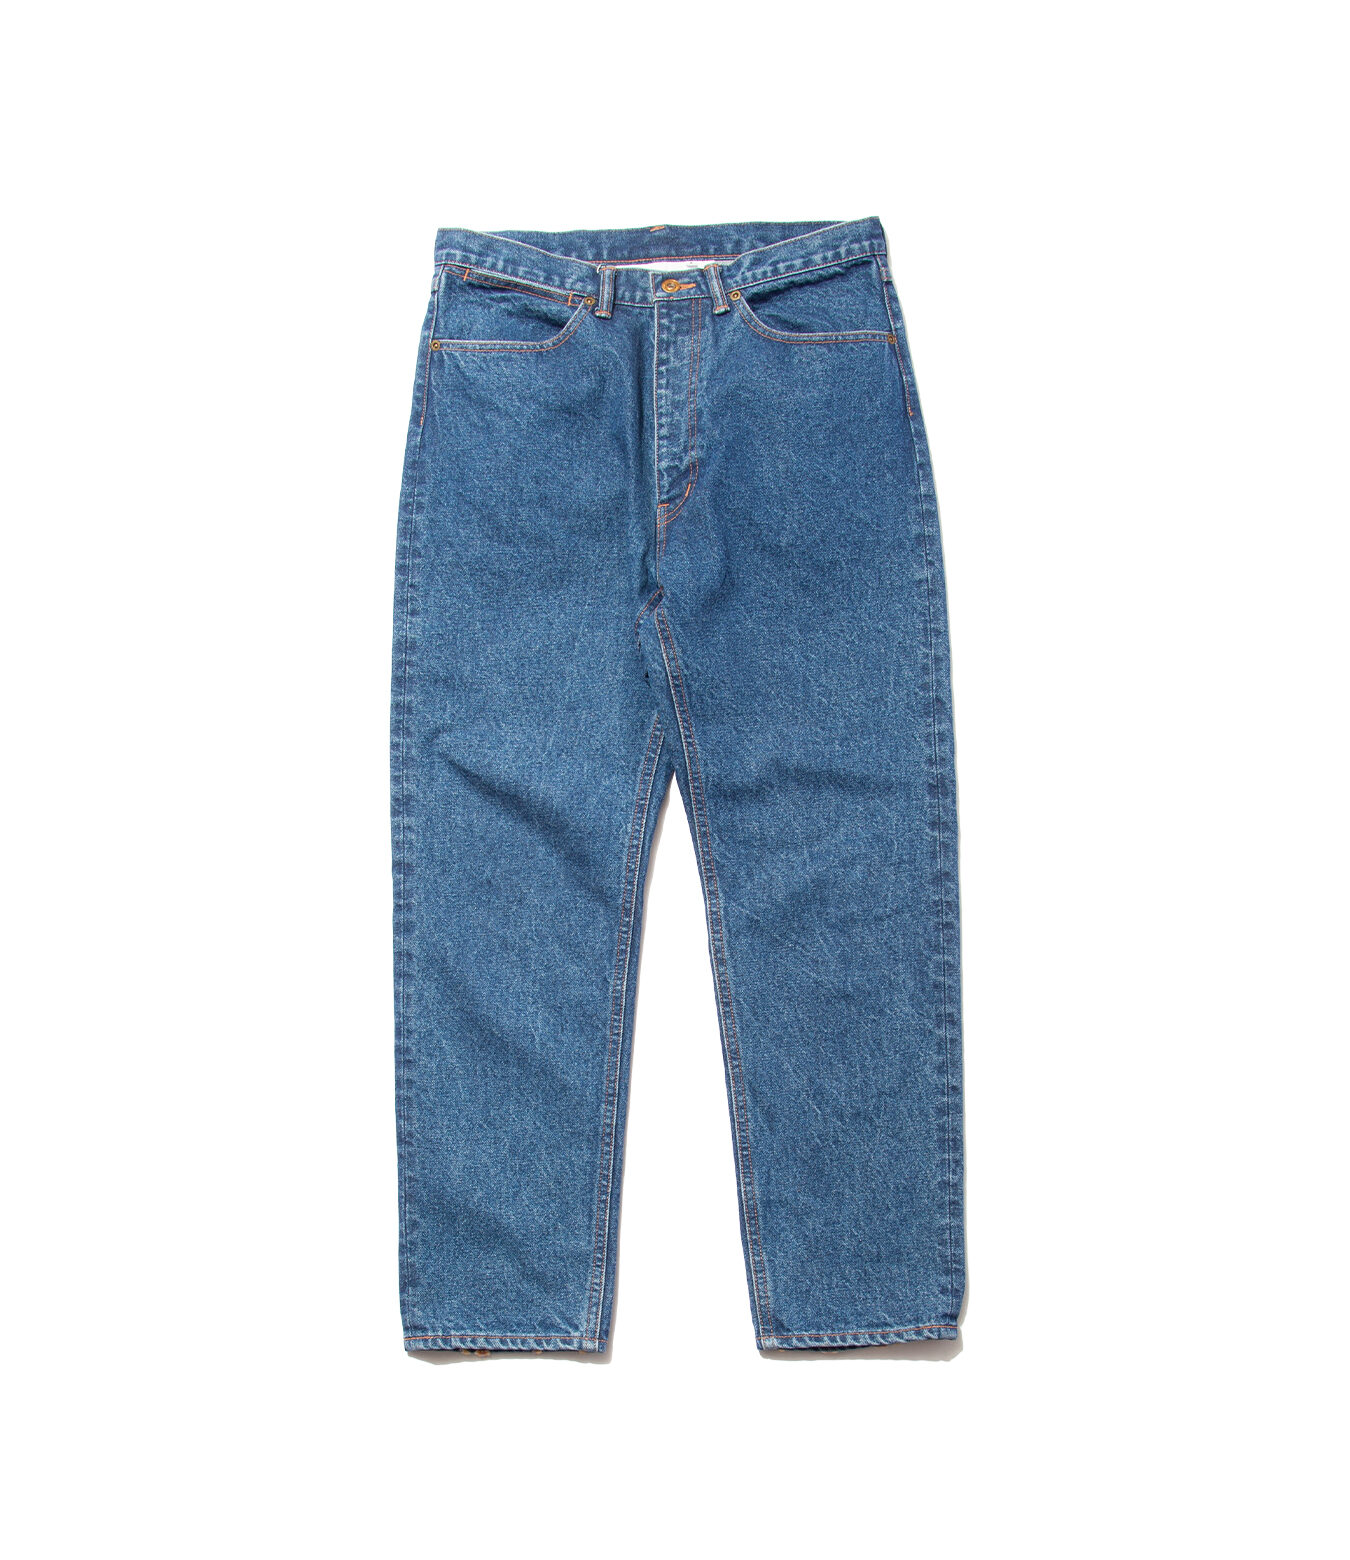 KYOU 　"JUDE" WITH GINKGO Standard by 80s Reproduced Denim